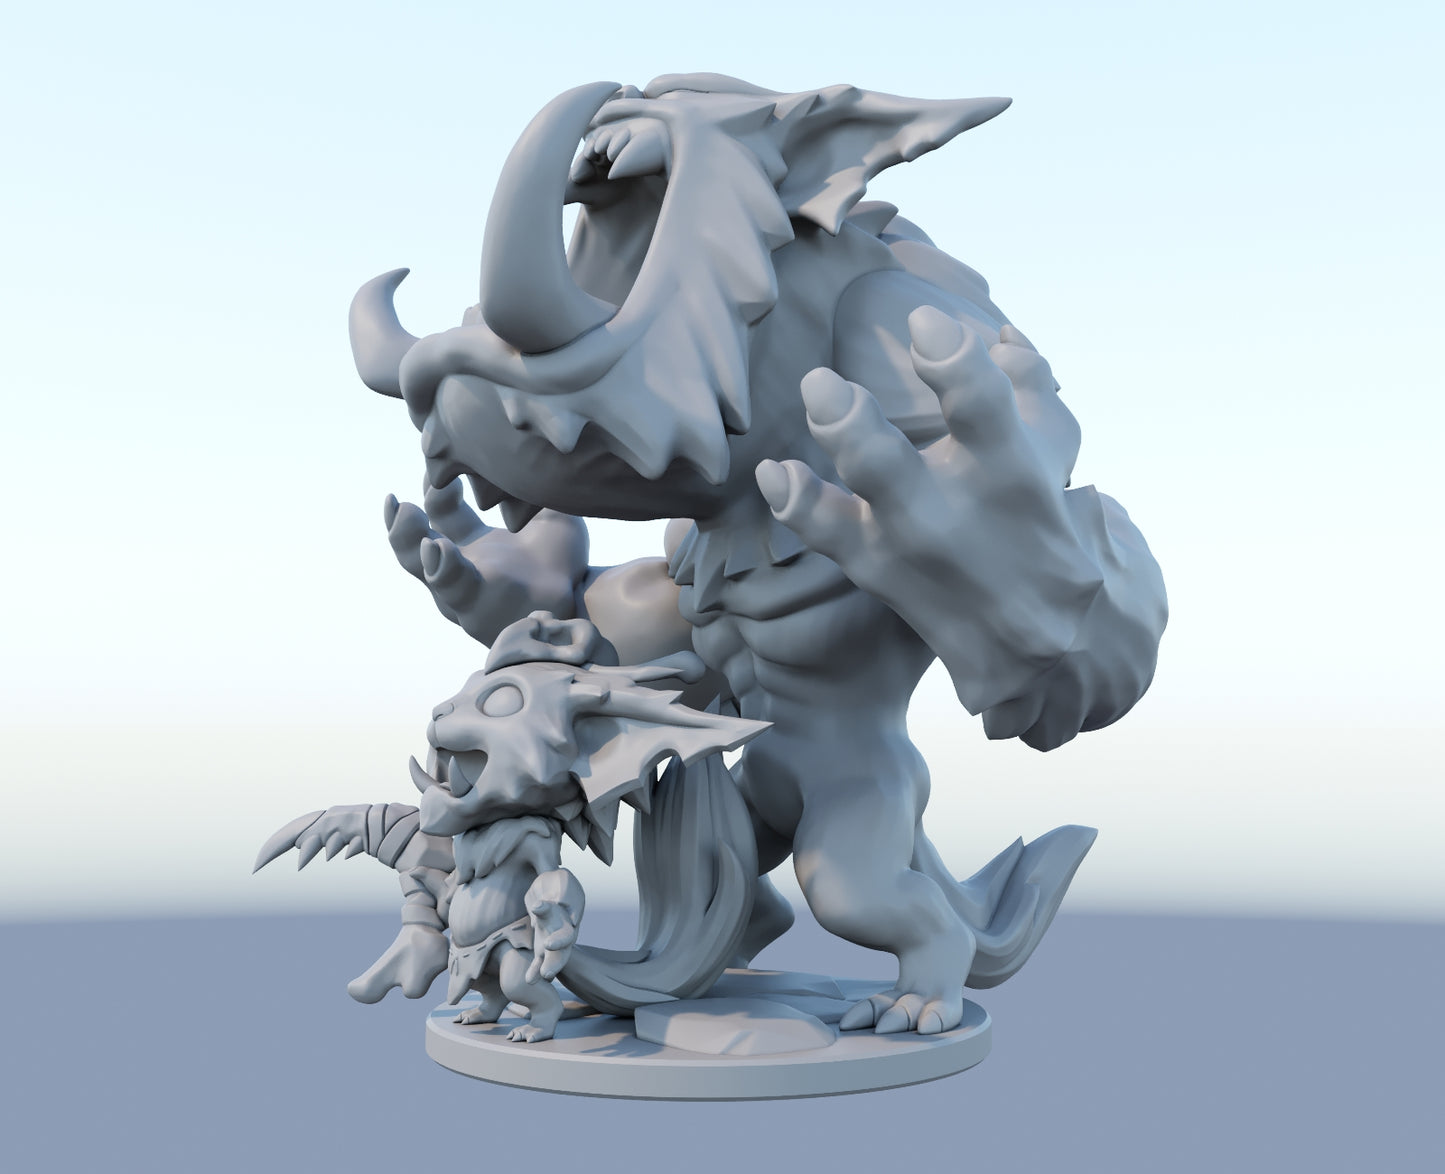 Gnar 3D-printed League of Legends champion figure. Decorate your gaming setup or home with your favorite League of Legends champion! Choose between the unpainted version, perfect for you to paint yourself, or the hand-painted version by a professional painter. Order your figure today!